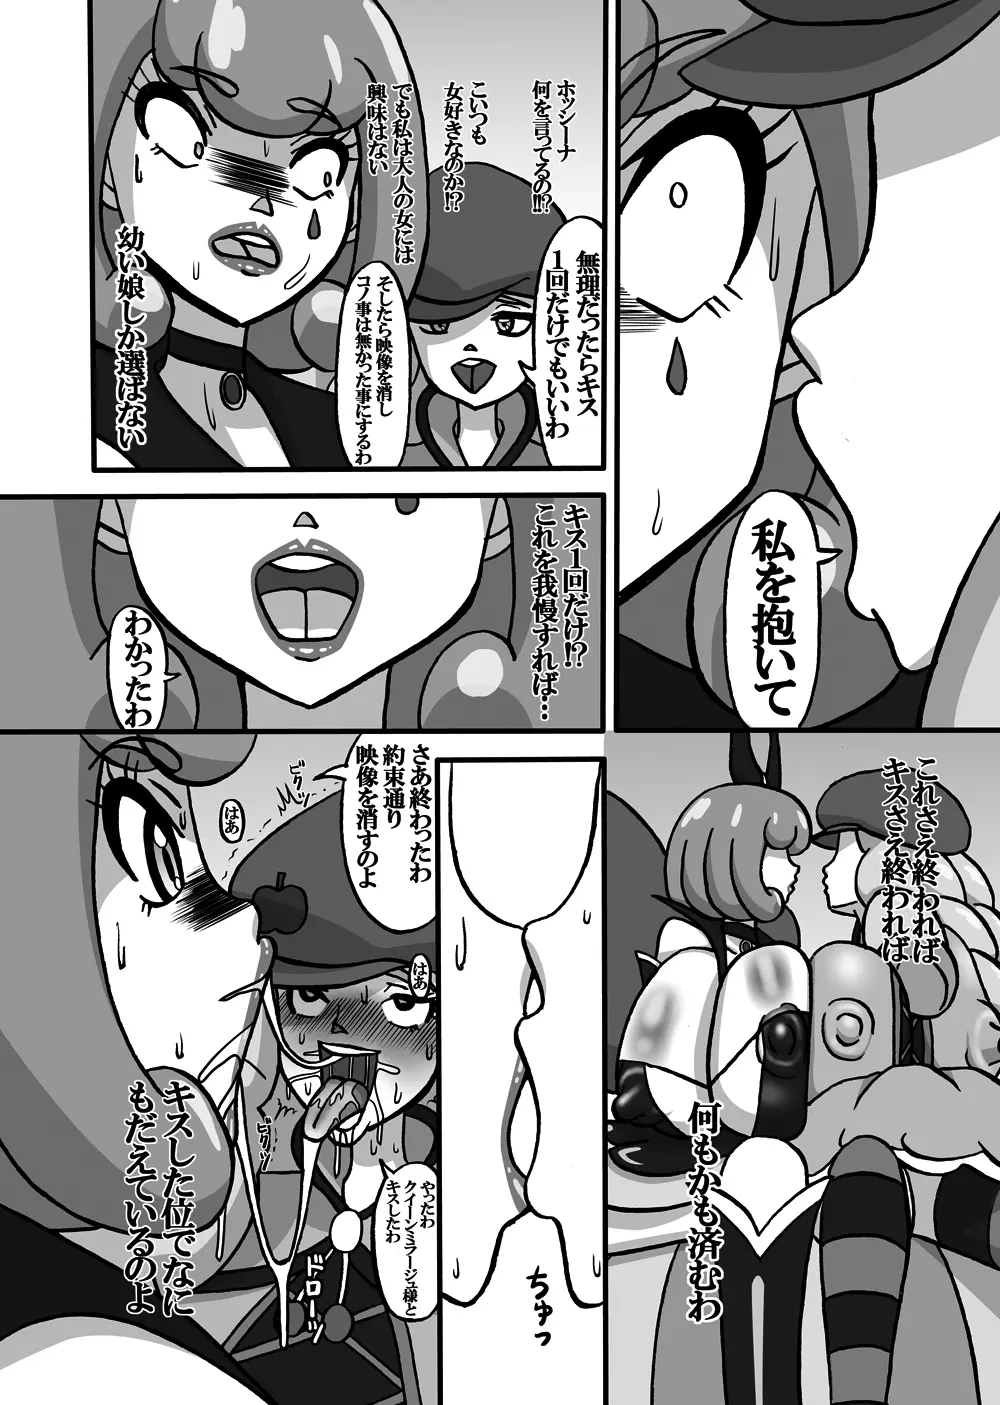 Sweetie Girls 12 ～ふたなりクイーン～ - page6